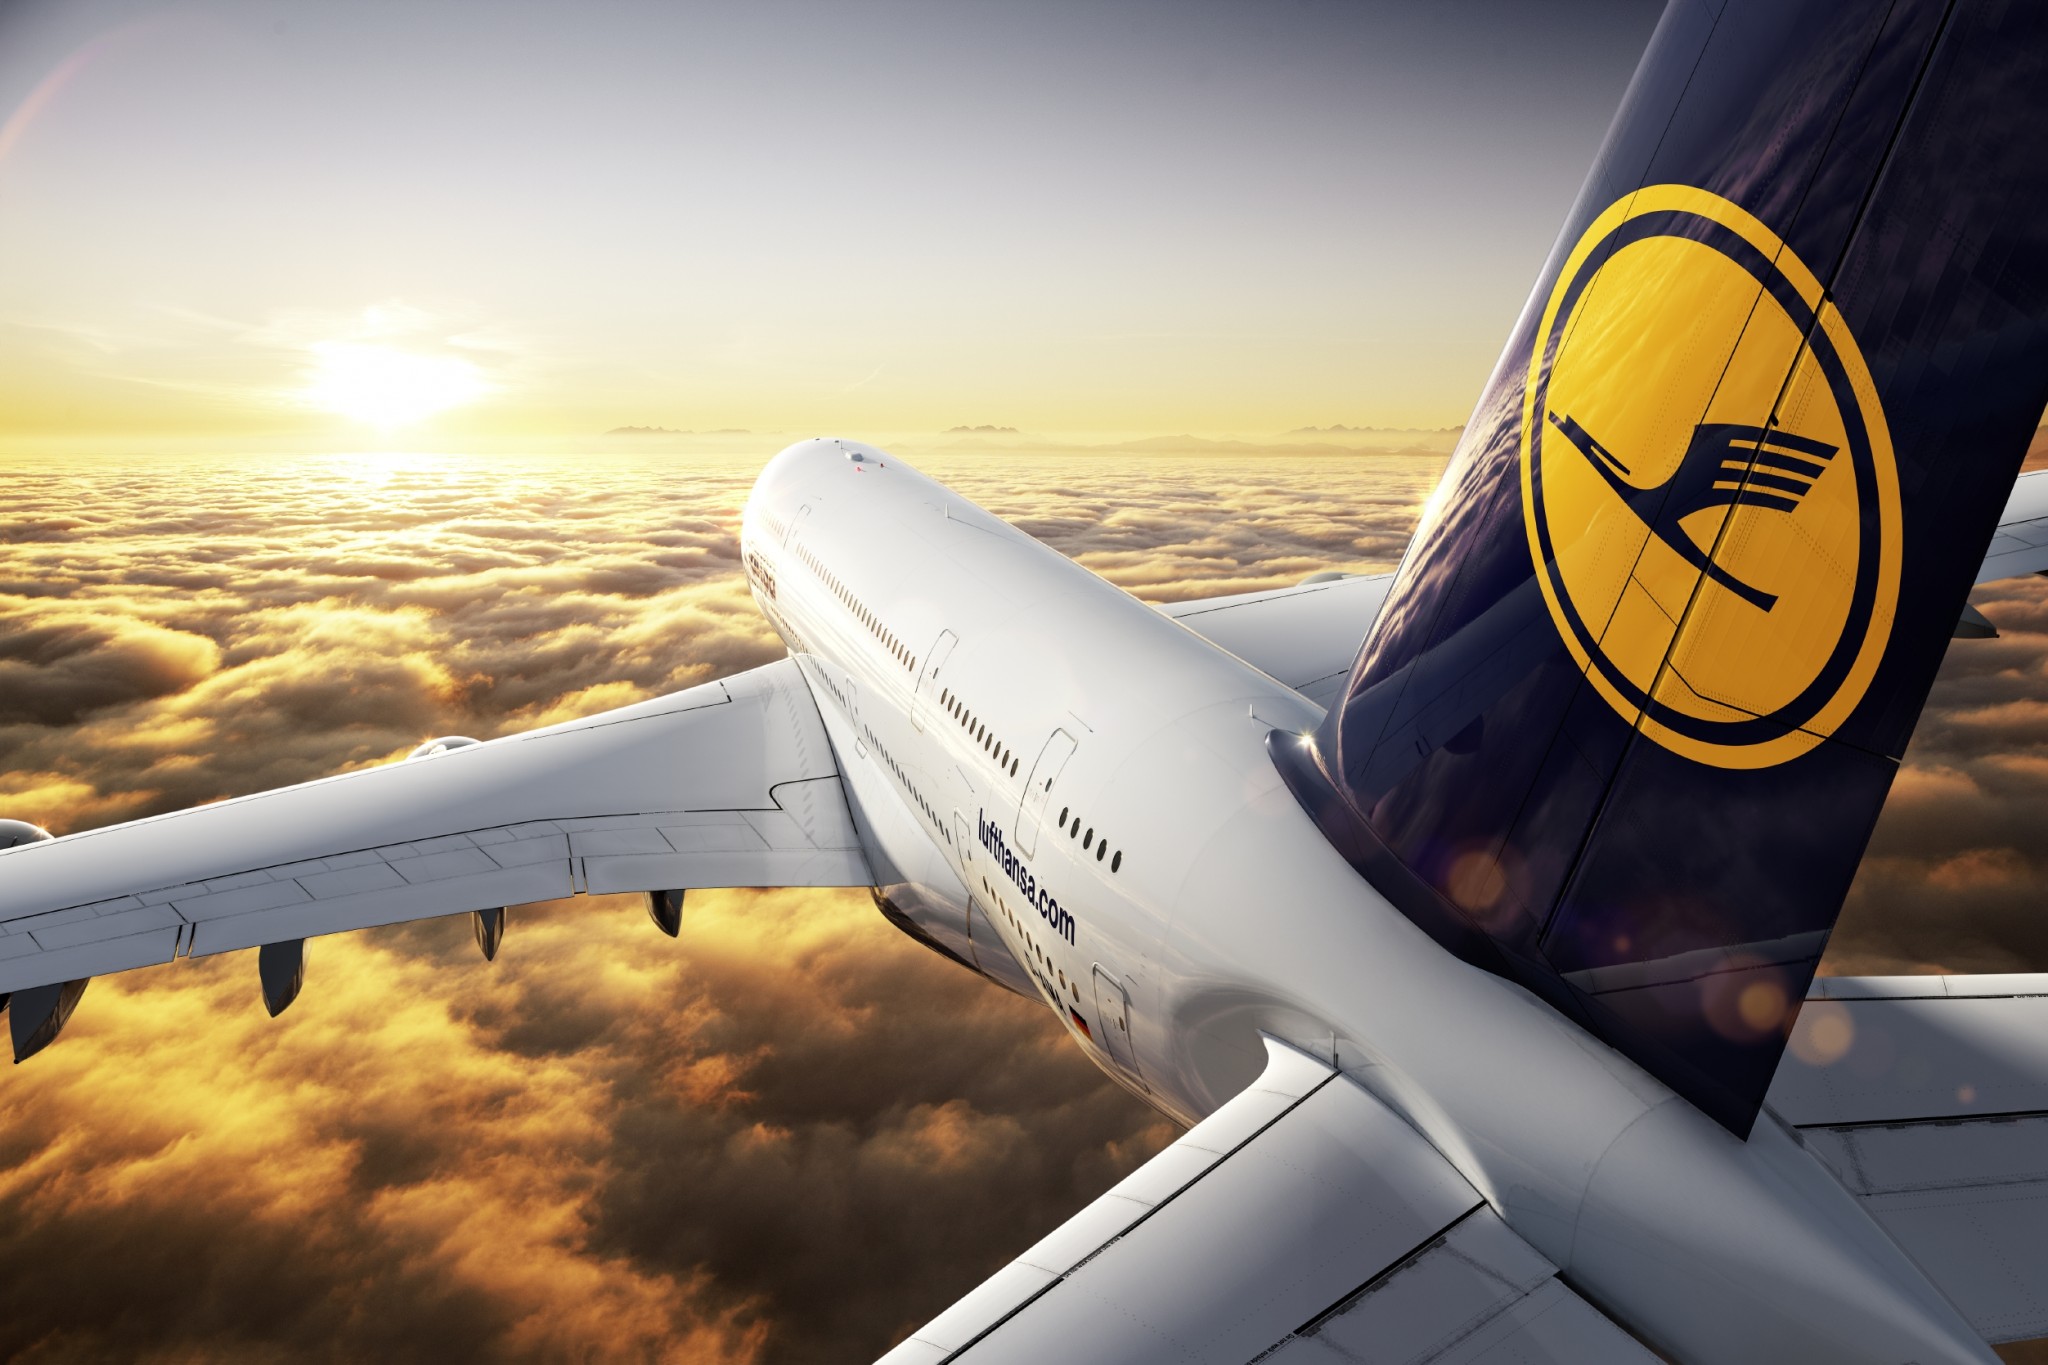 Lufthansa Group: Digitalization supports the green transformation